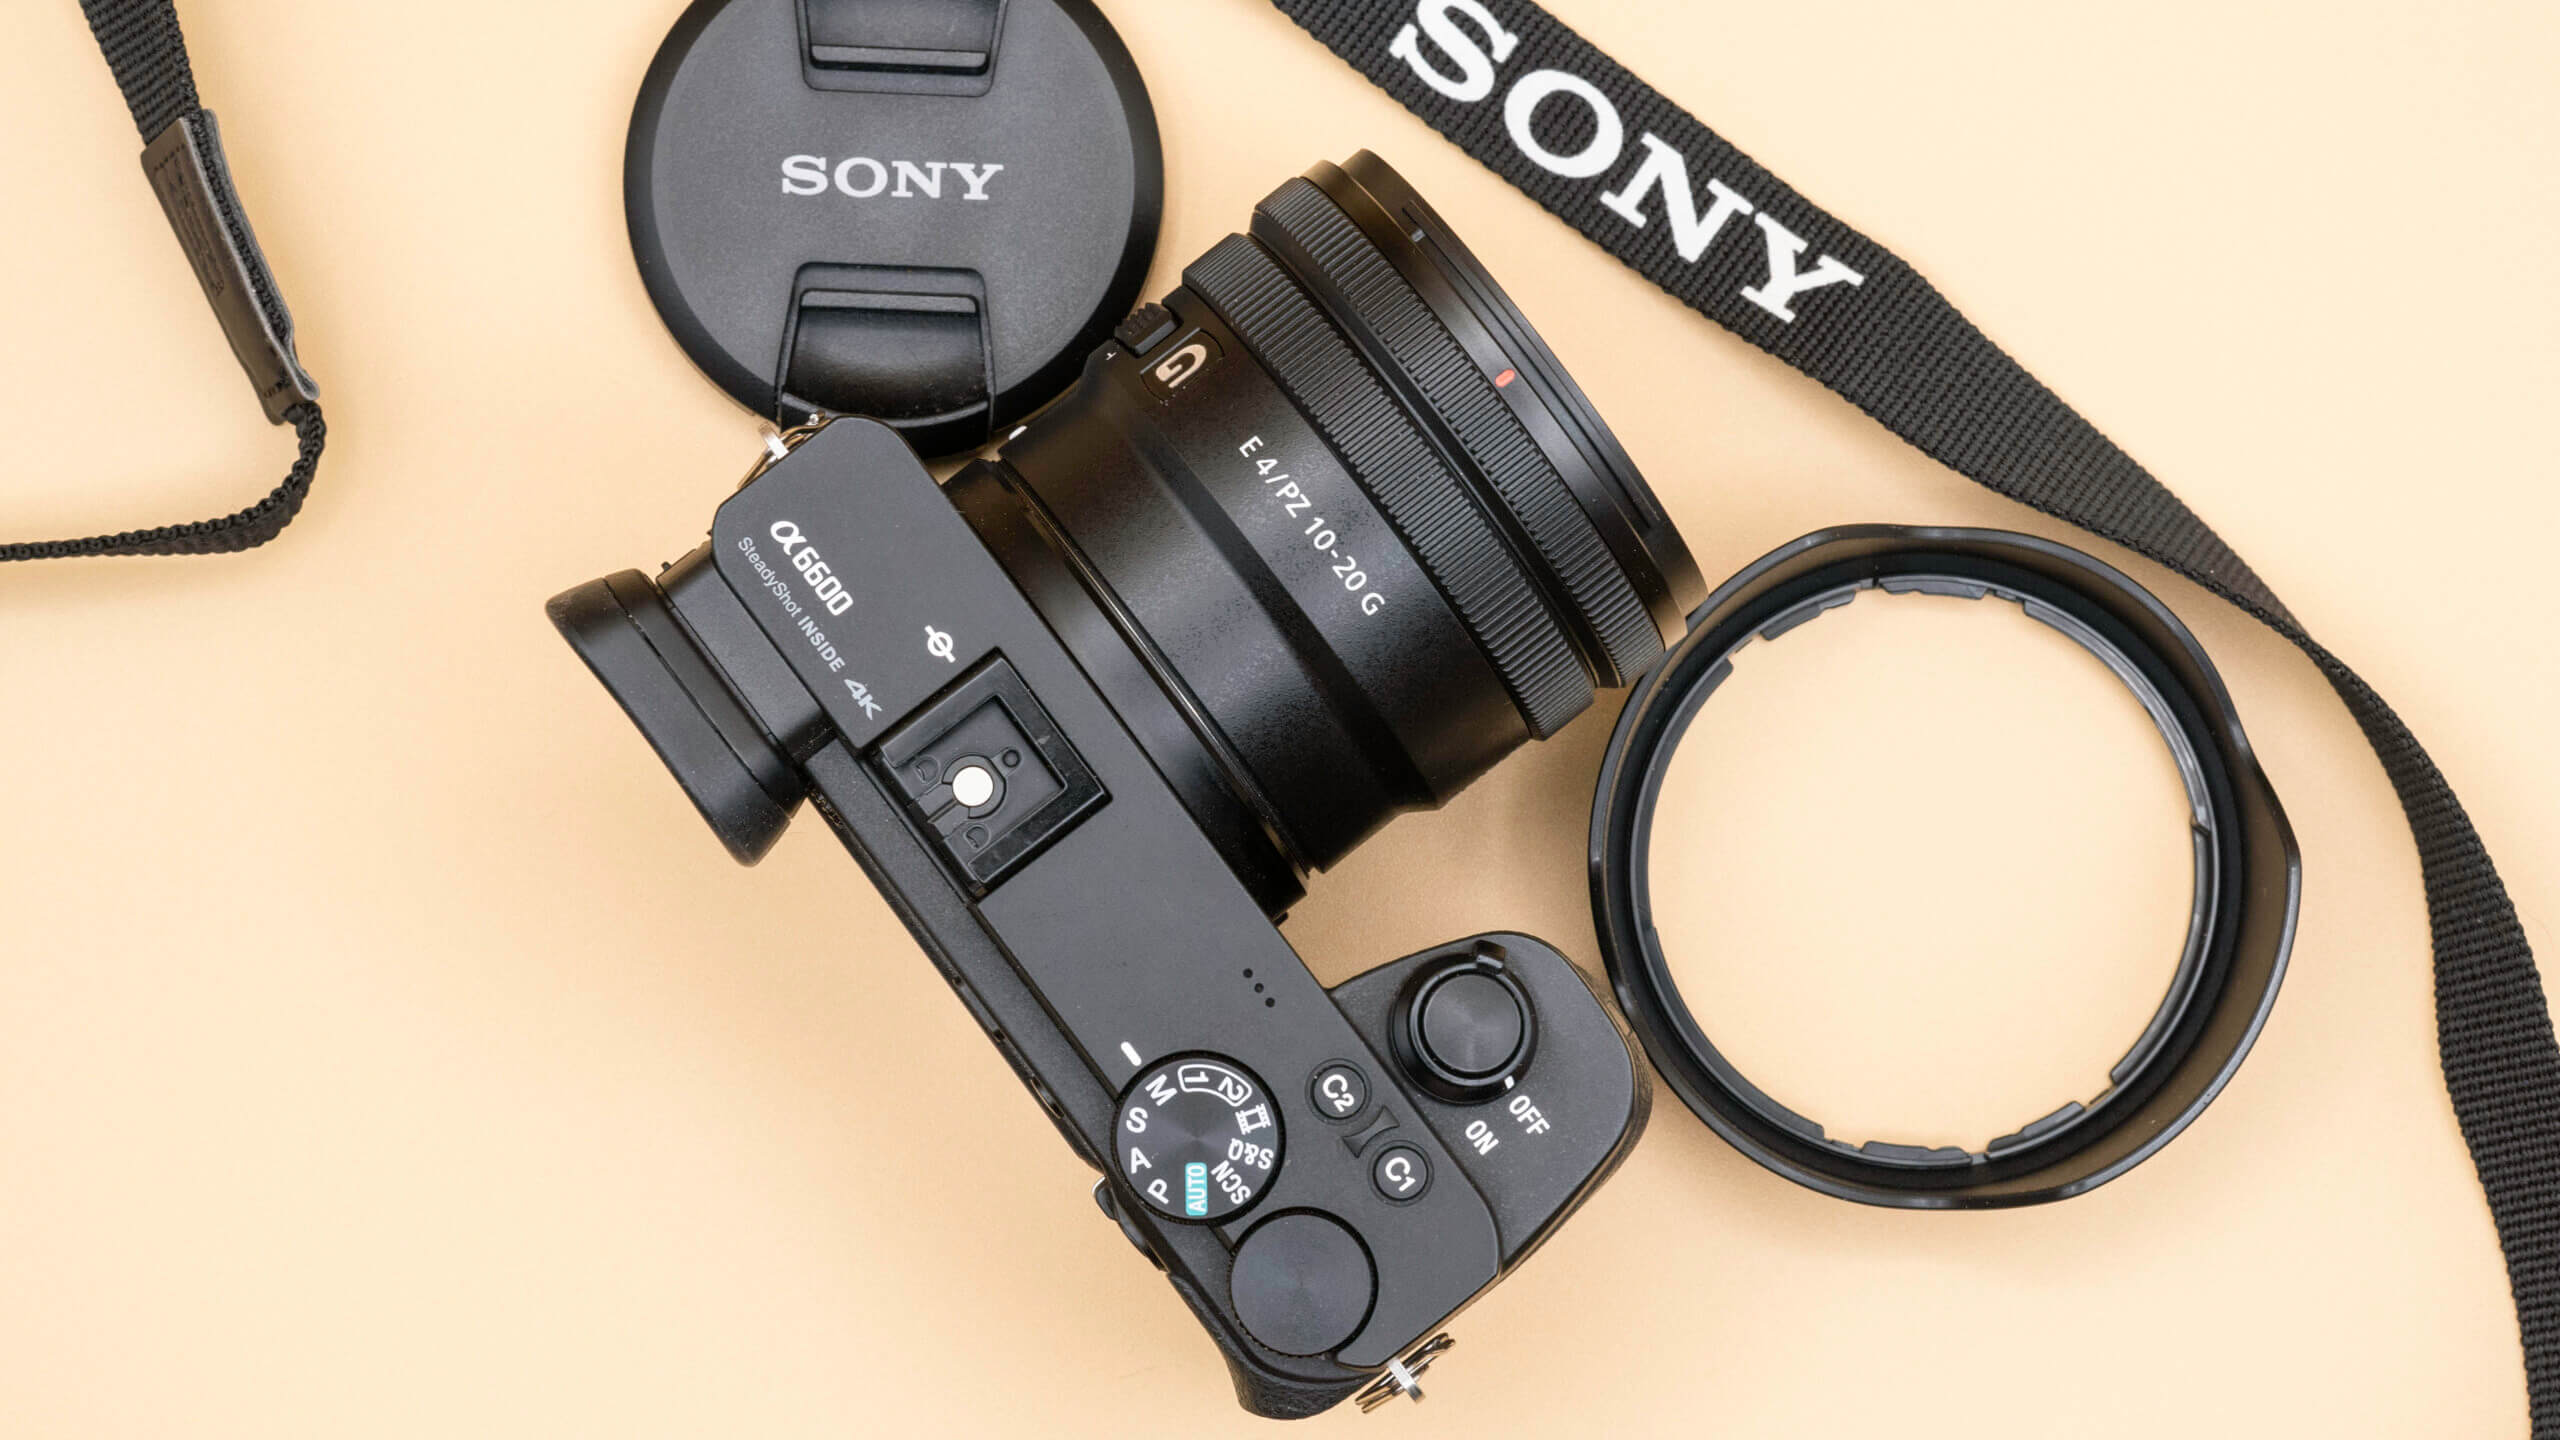 Sony 10-20mm F/4 PZ G review: A solid APS-C wide angle zoom